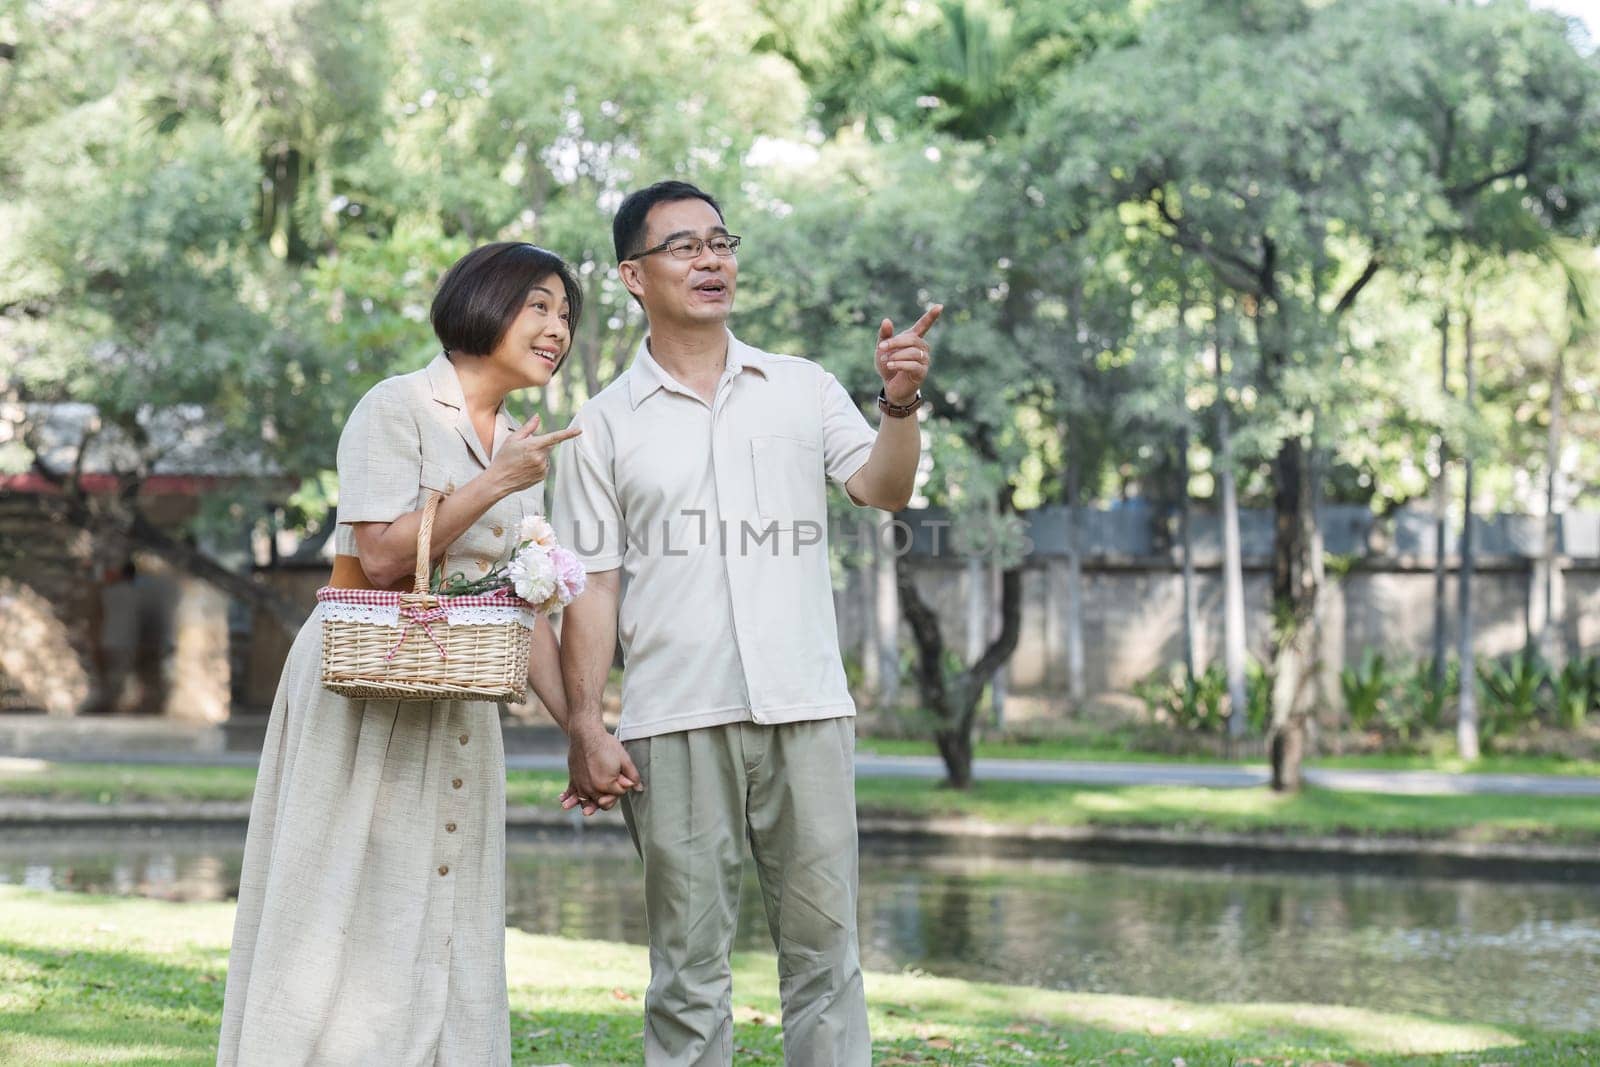 Senior man and wife holding a picnic basket walking among the green trees in the park A retired couple in their 60s walked through the garden together enjoying their vacation..